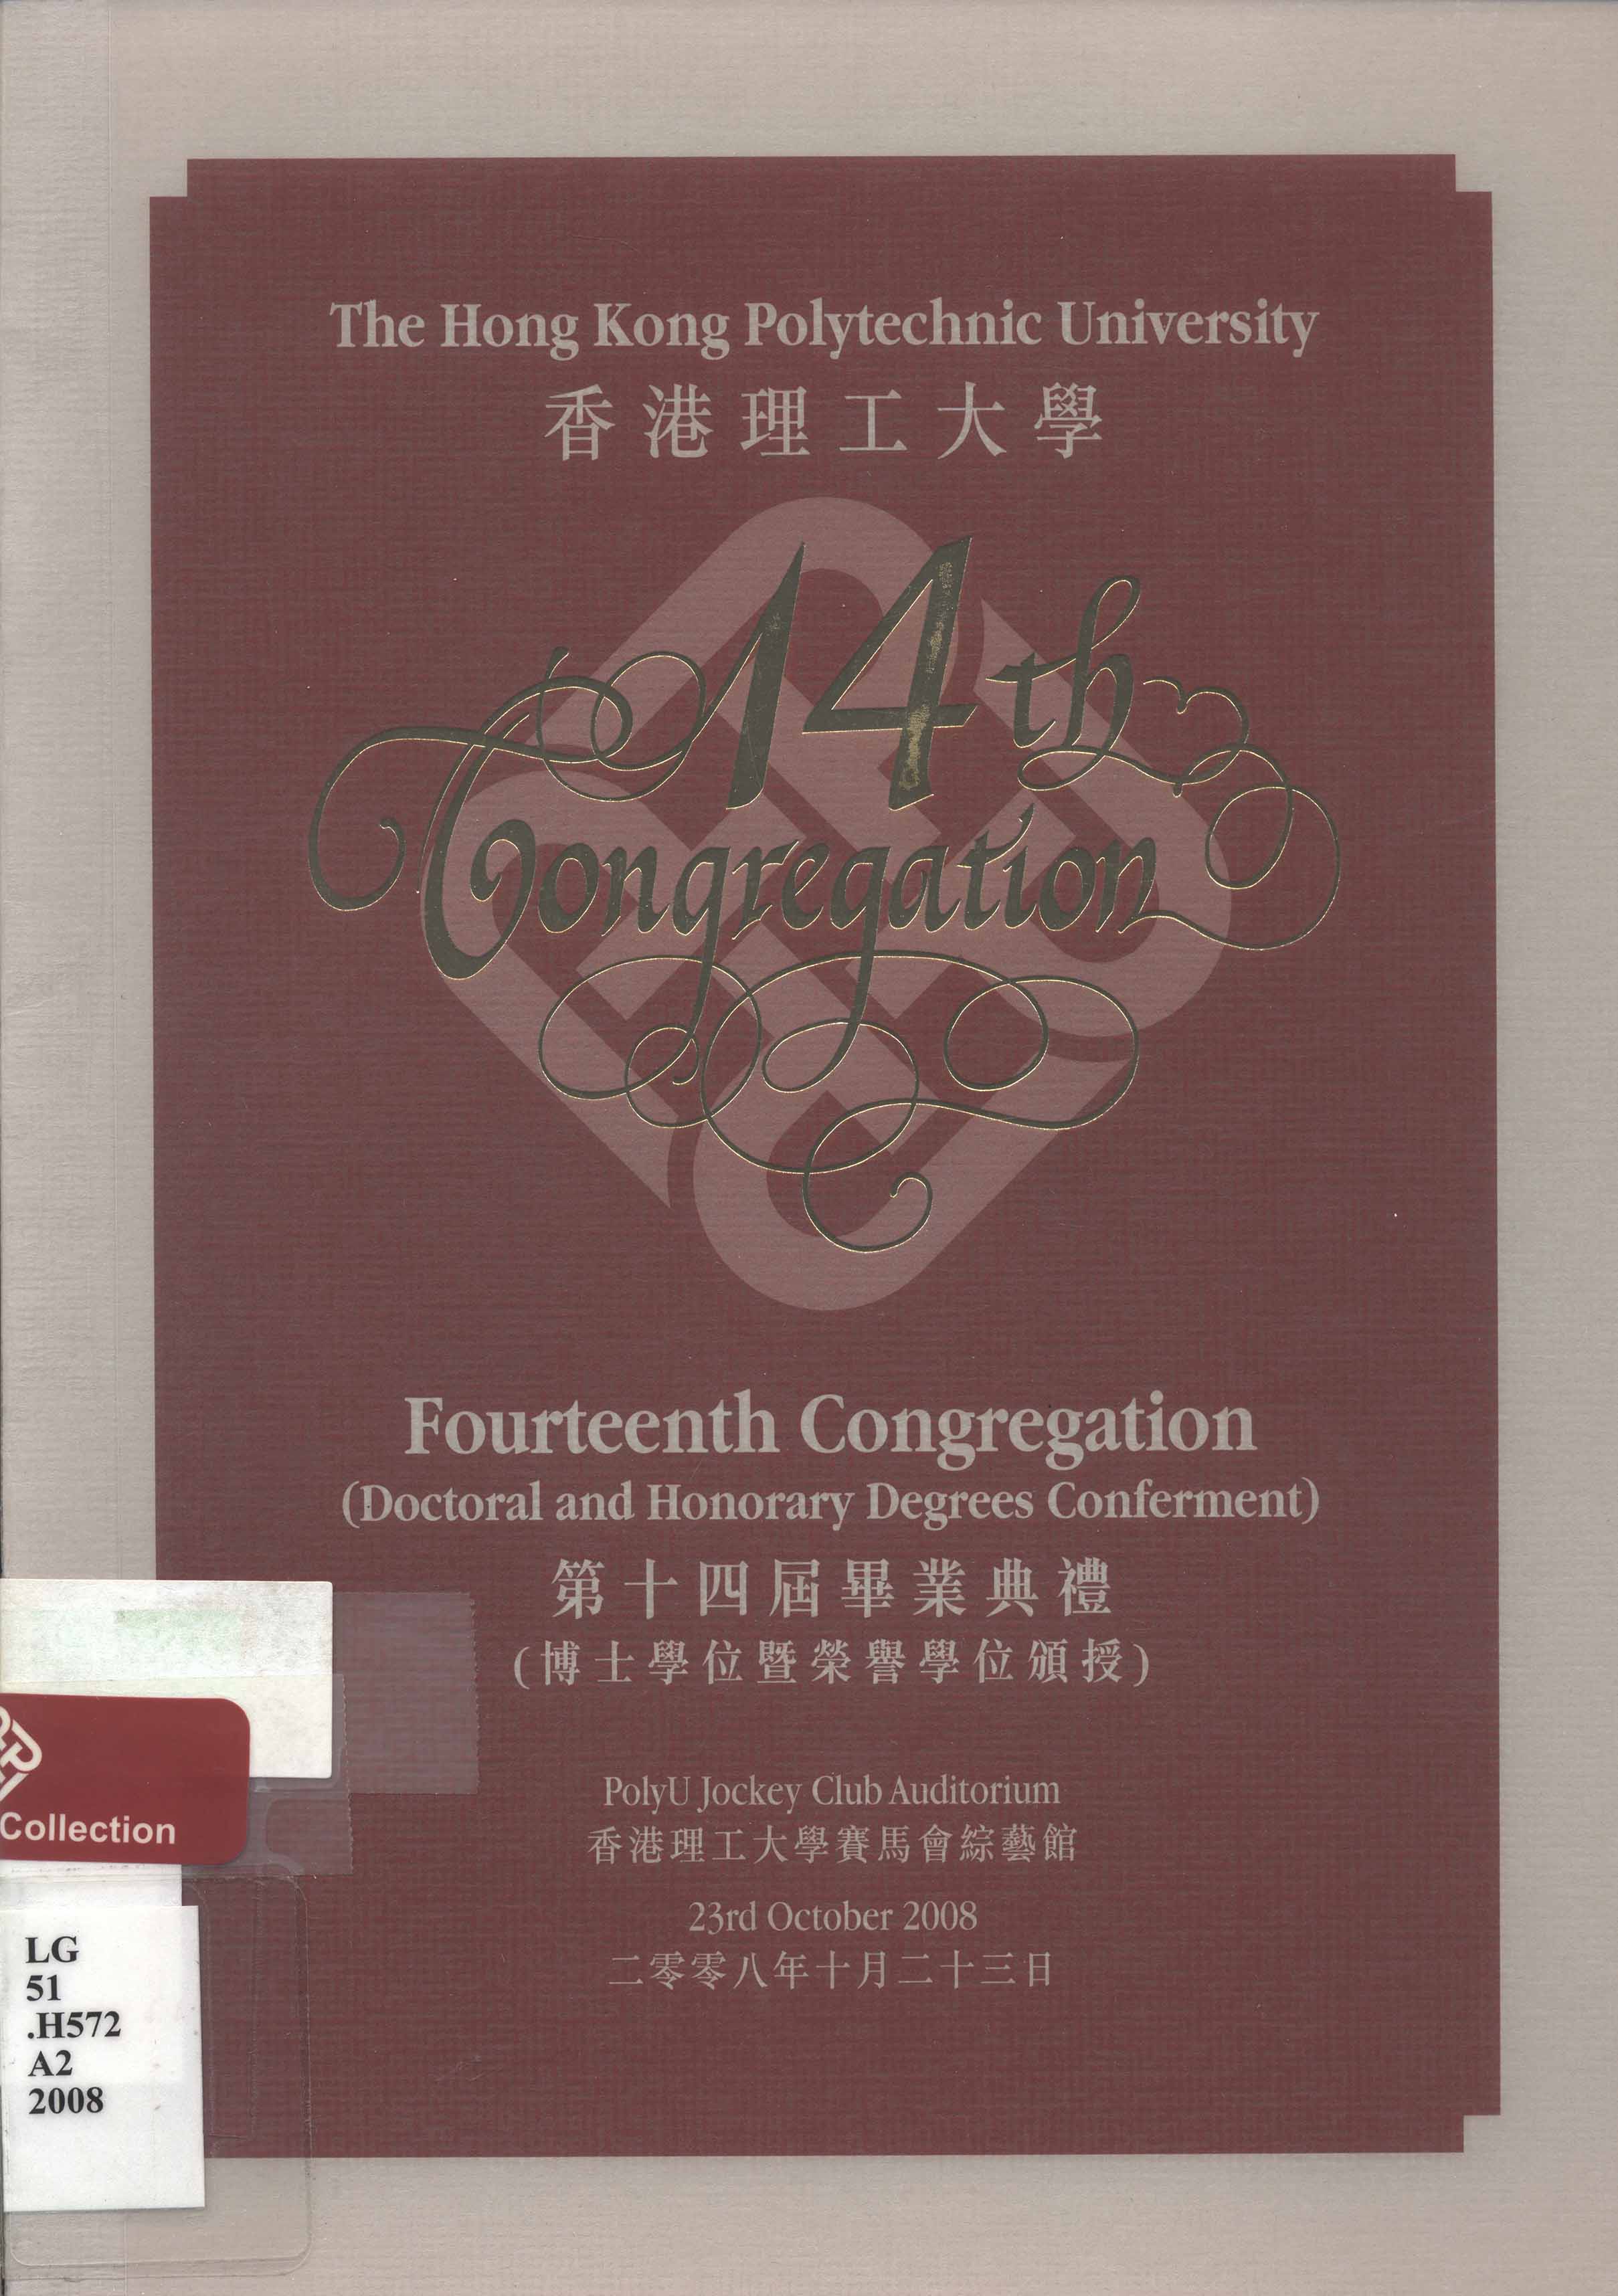 The Hong Kong Polytechnic University Fourteenth Congregation: Doctoral and honorary degrees conferment [2008]